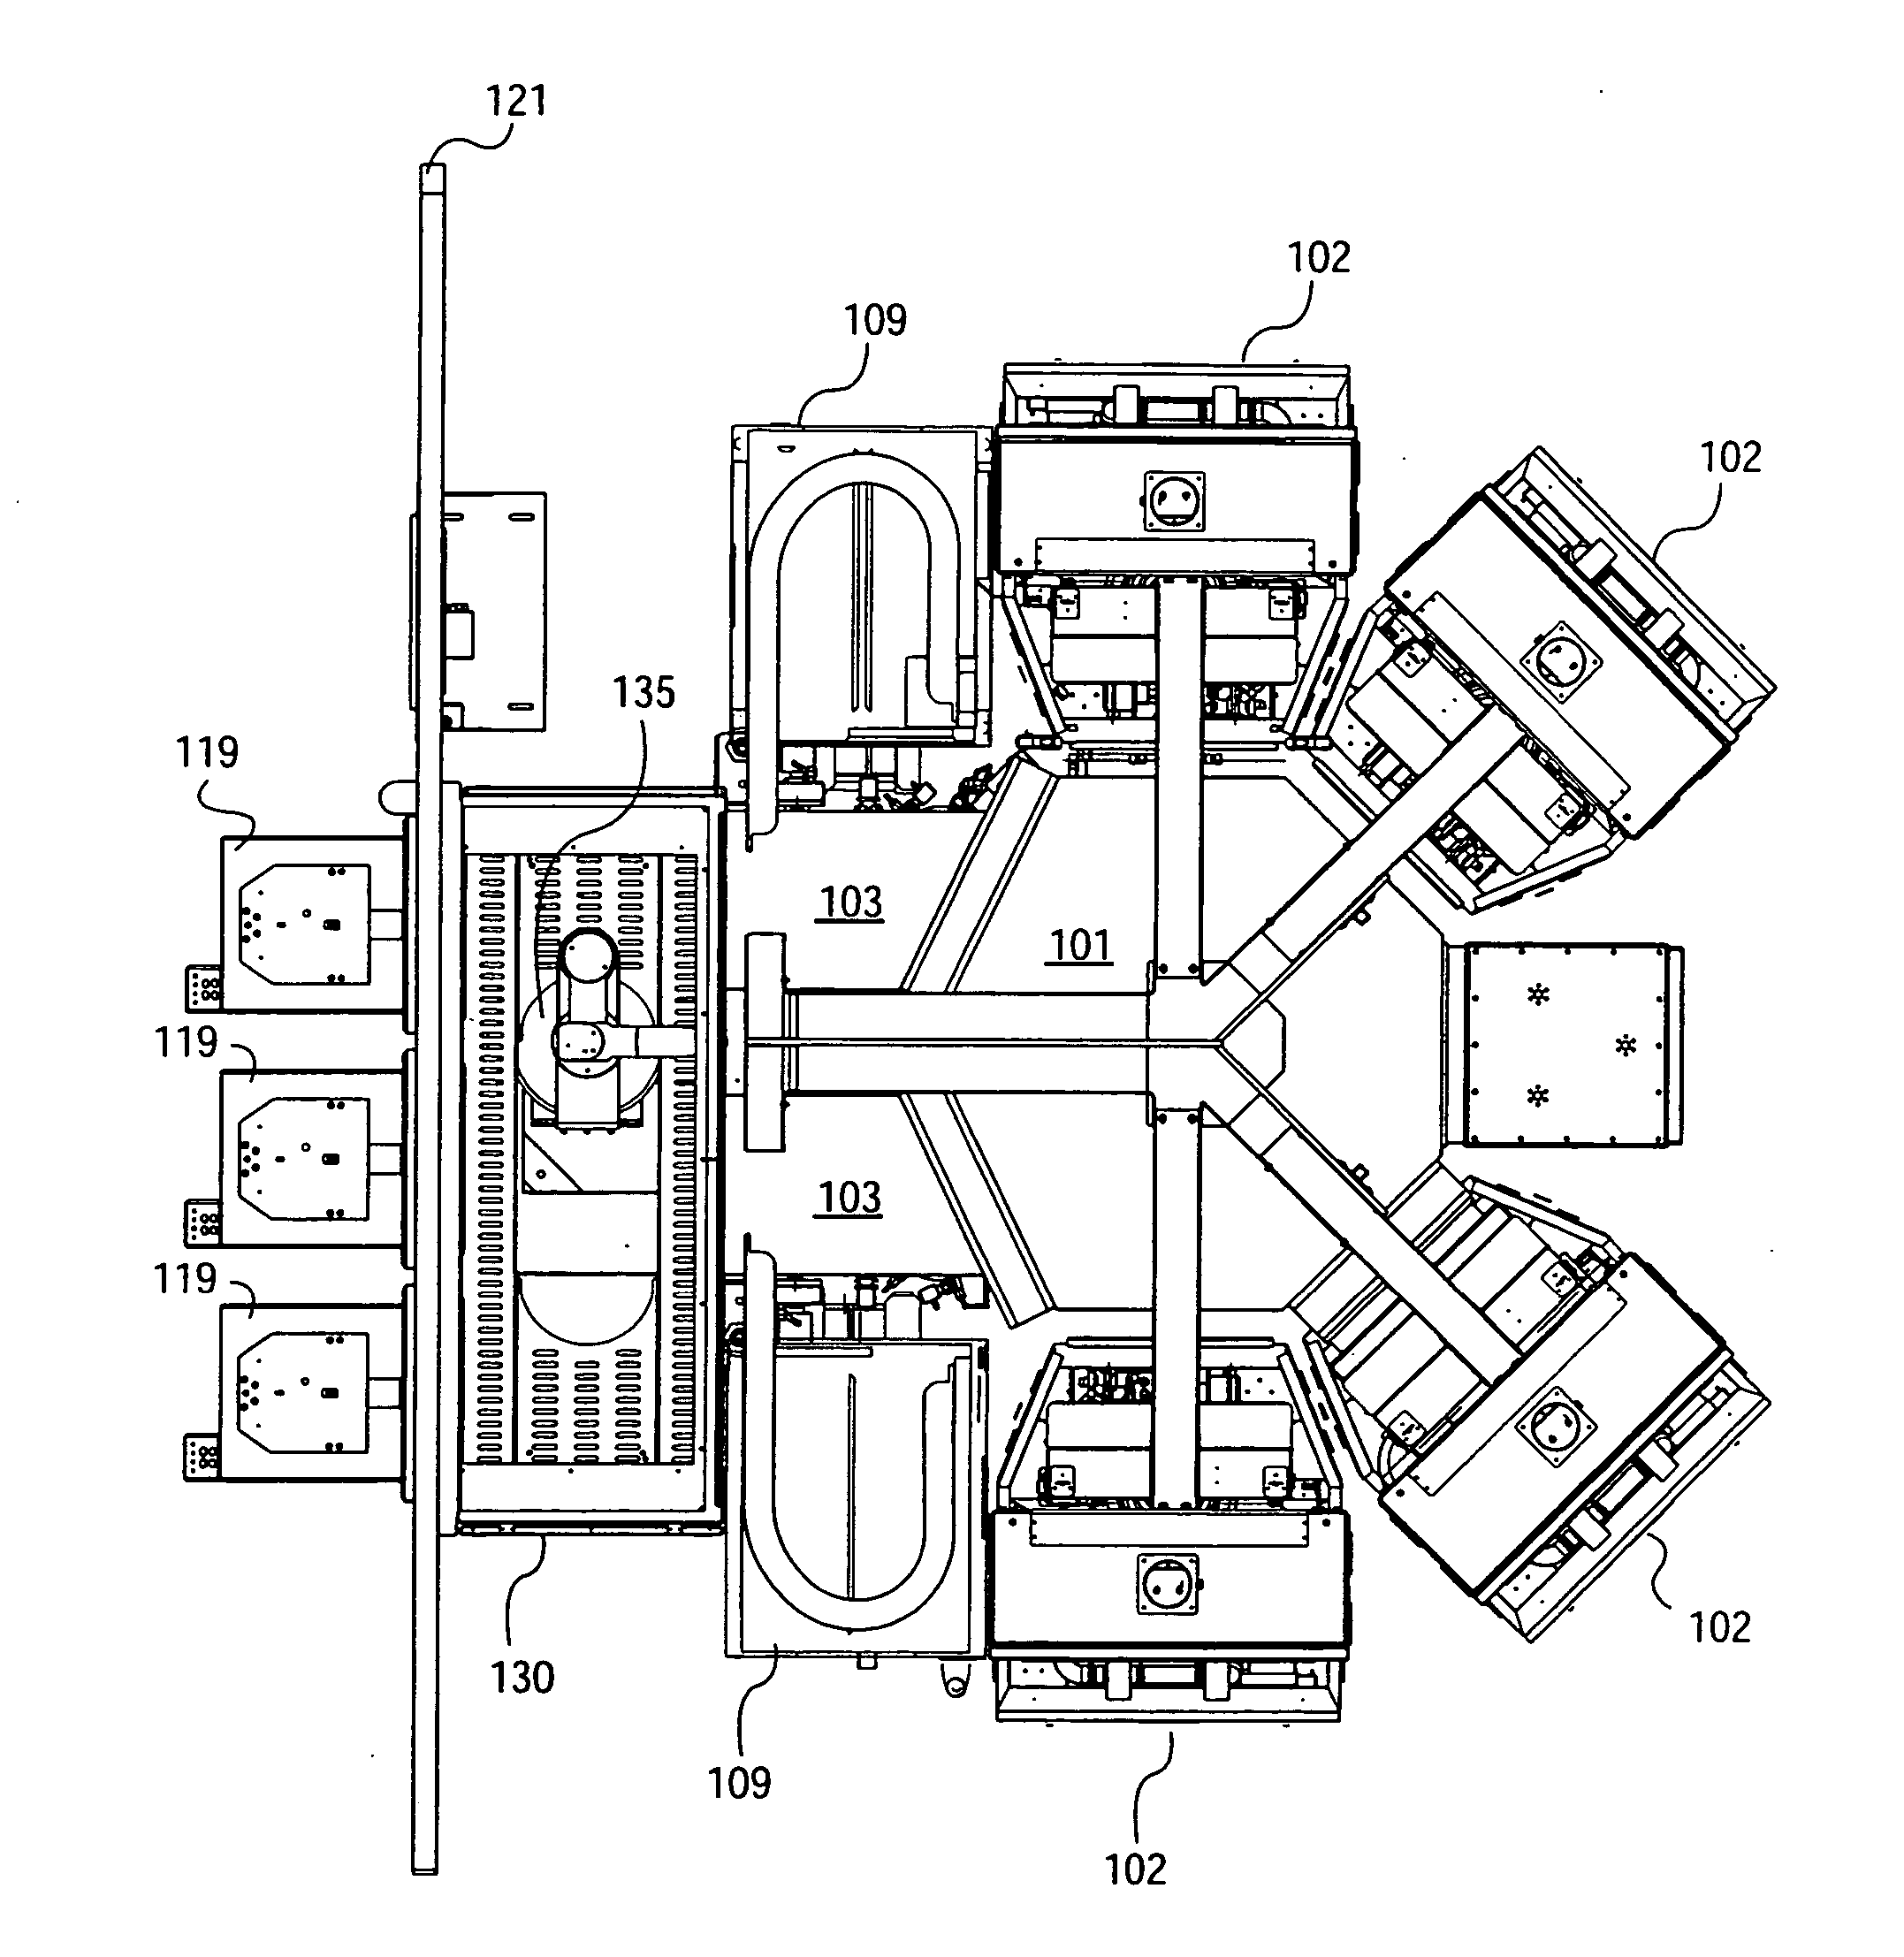 Massively parallel atomic layer deposition/chemical vapor deposition system